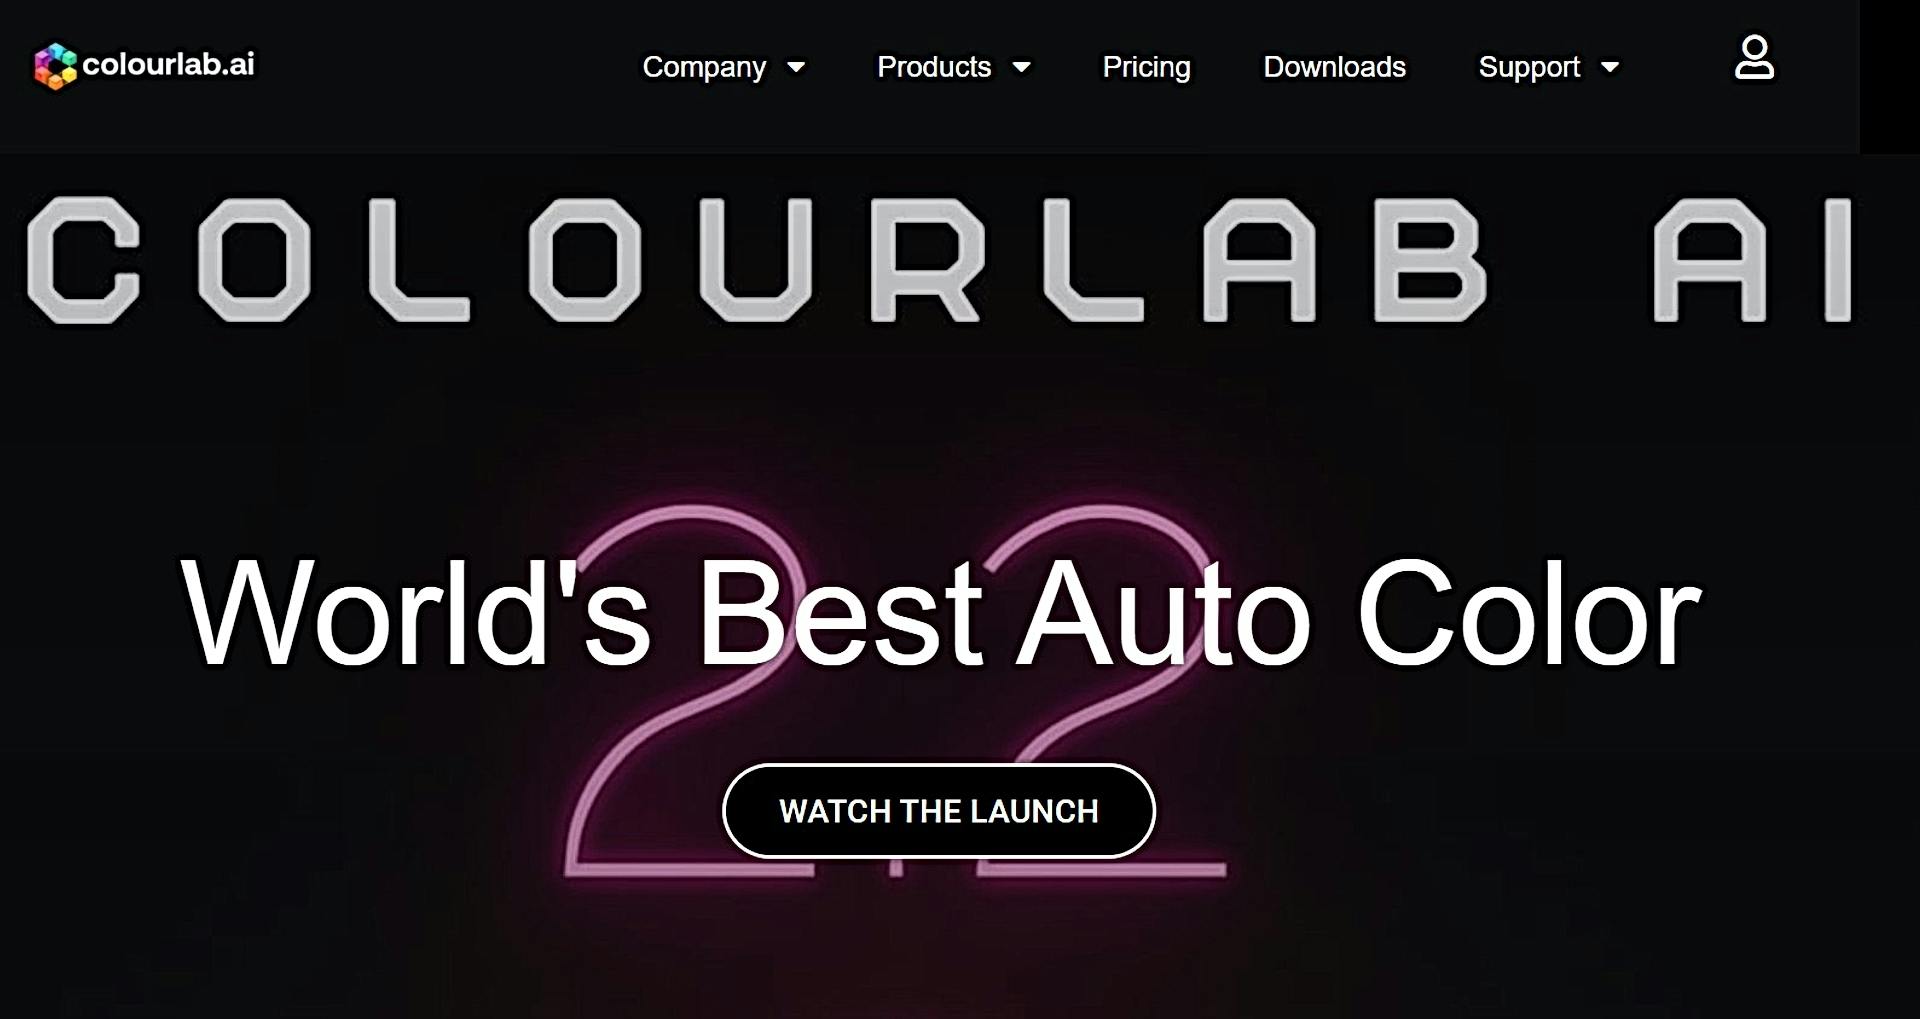 Colourlab featured